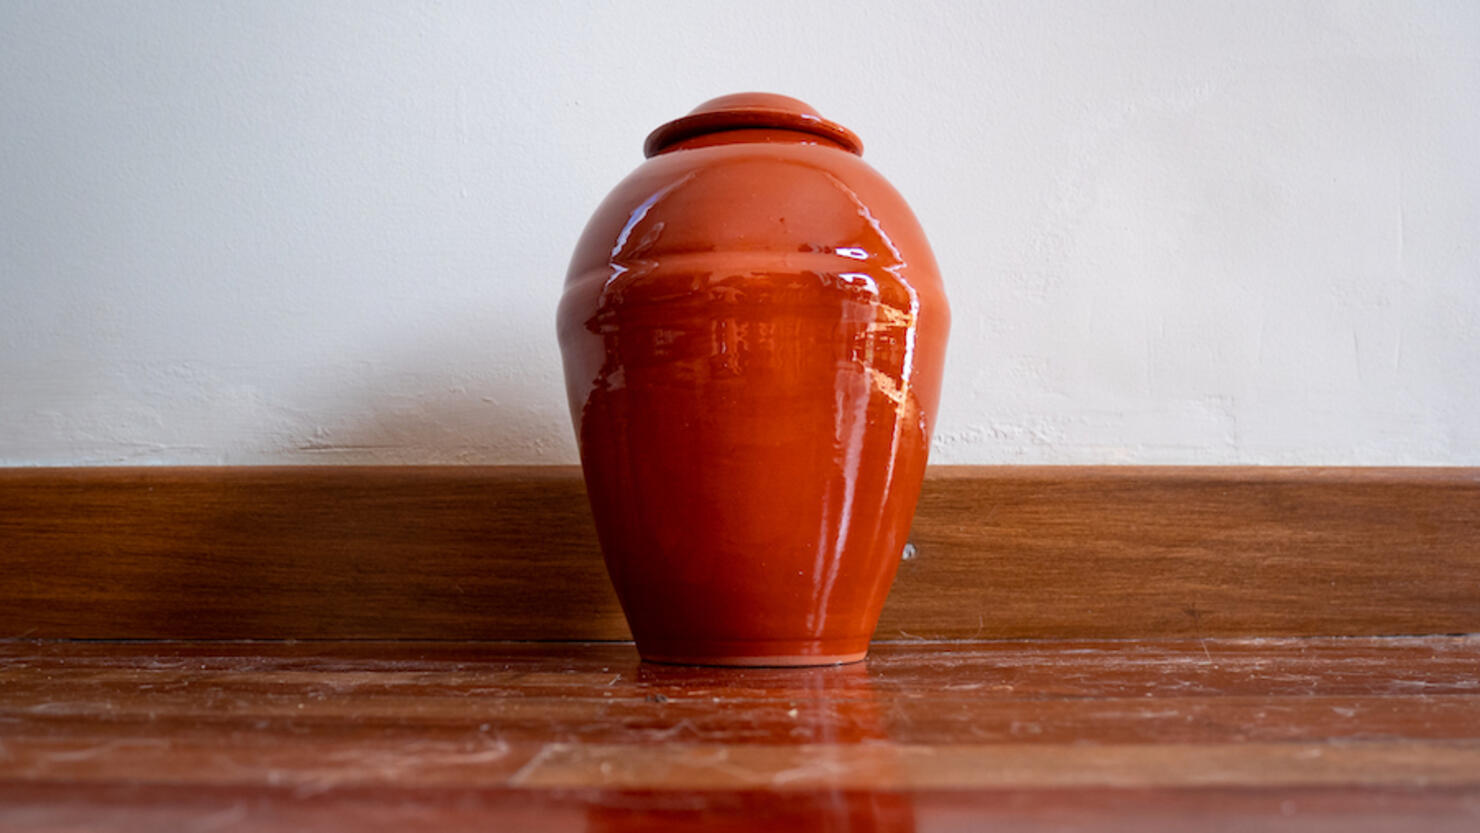 Orange Urn Leaning Against the White Wall